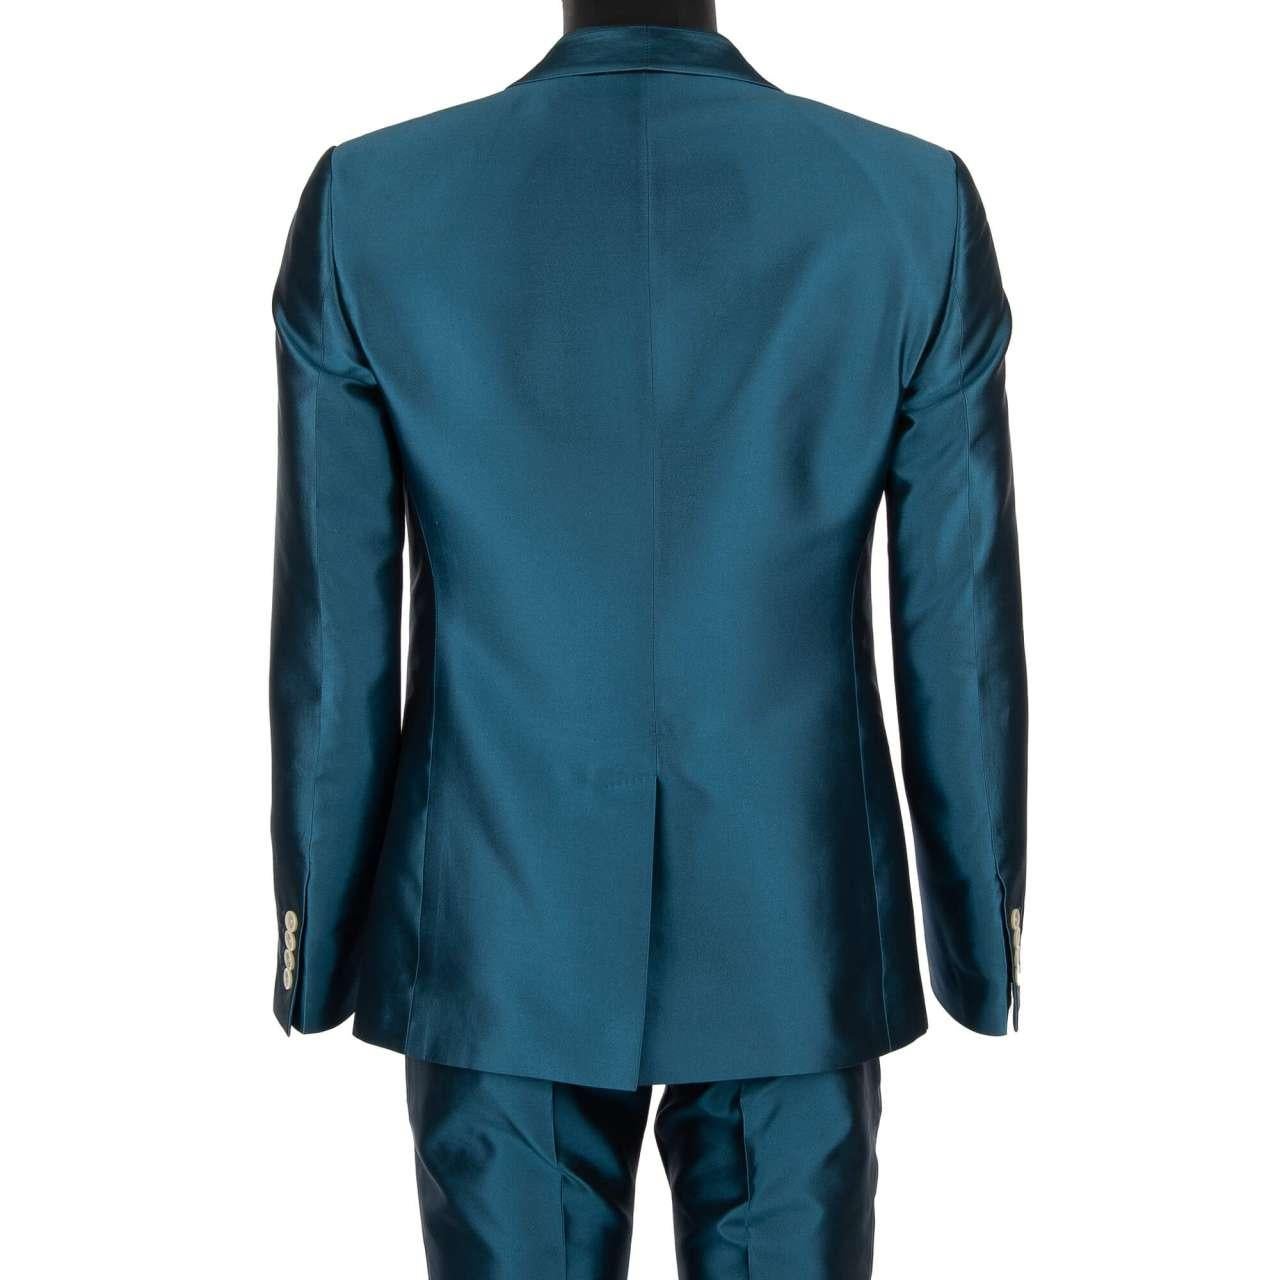 - Silk 3 piece suit, jacket, waistcoat, pants in blue by DOLCE & GABBANA - SICILIA Model - RUNWAY - Dolce & Gabbana Fashion Show - New with tag - Former RRP: EUR 3,350 - MADE in ITALY - Slim Fit - Model: G1XTMT-FU1B8-B1095 - Material: 100% Silk -